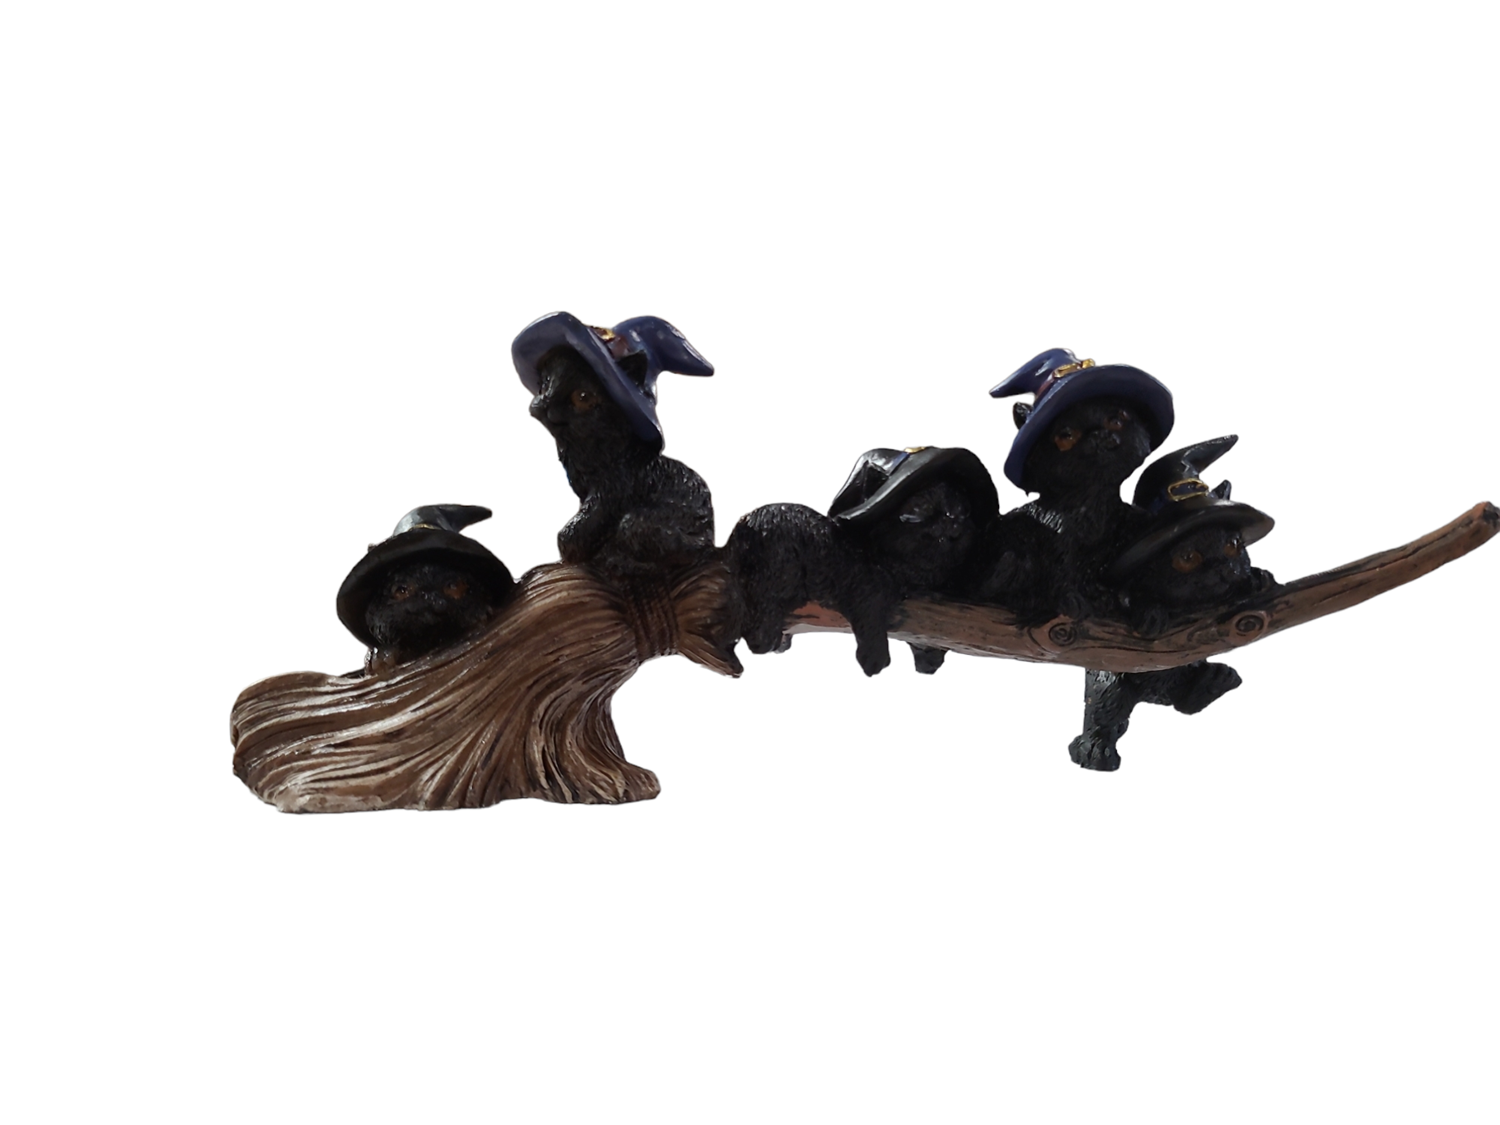 Black Cats playing on broomstick - 28cm